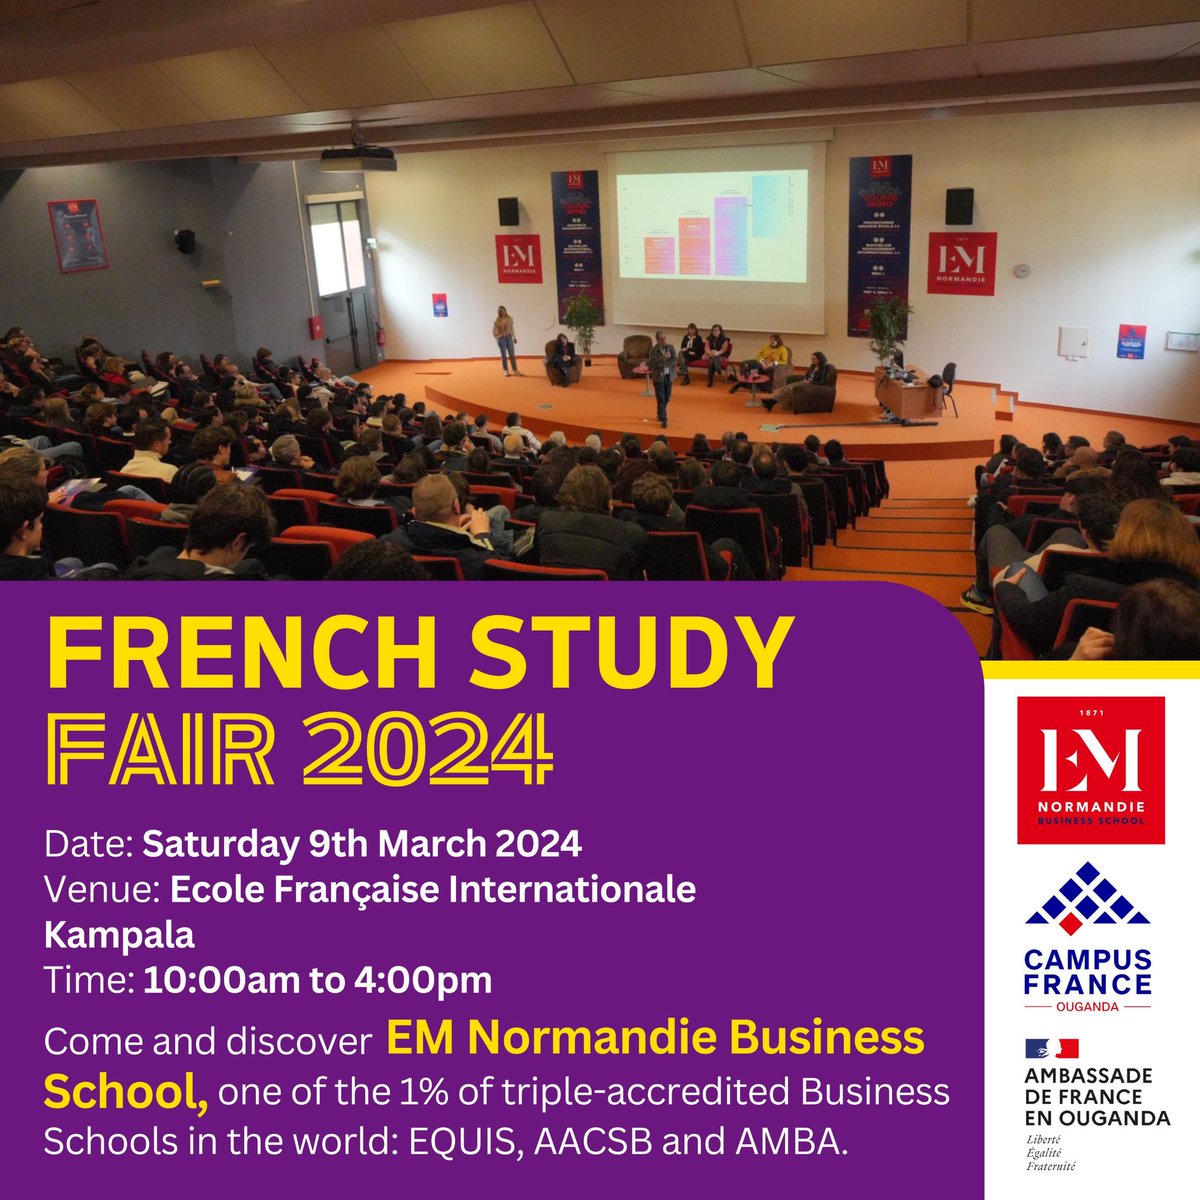 Because Business runs the world ! We also have @EMNormandie with us today, if Business Studies are your interest. Pass by @lfkampala to speak to a represententive and fulfil your dream of studying in France. #RendezvousenFrance 🇫🇷